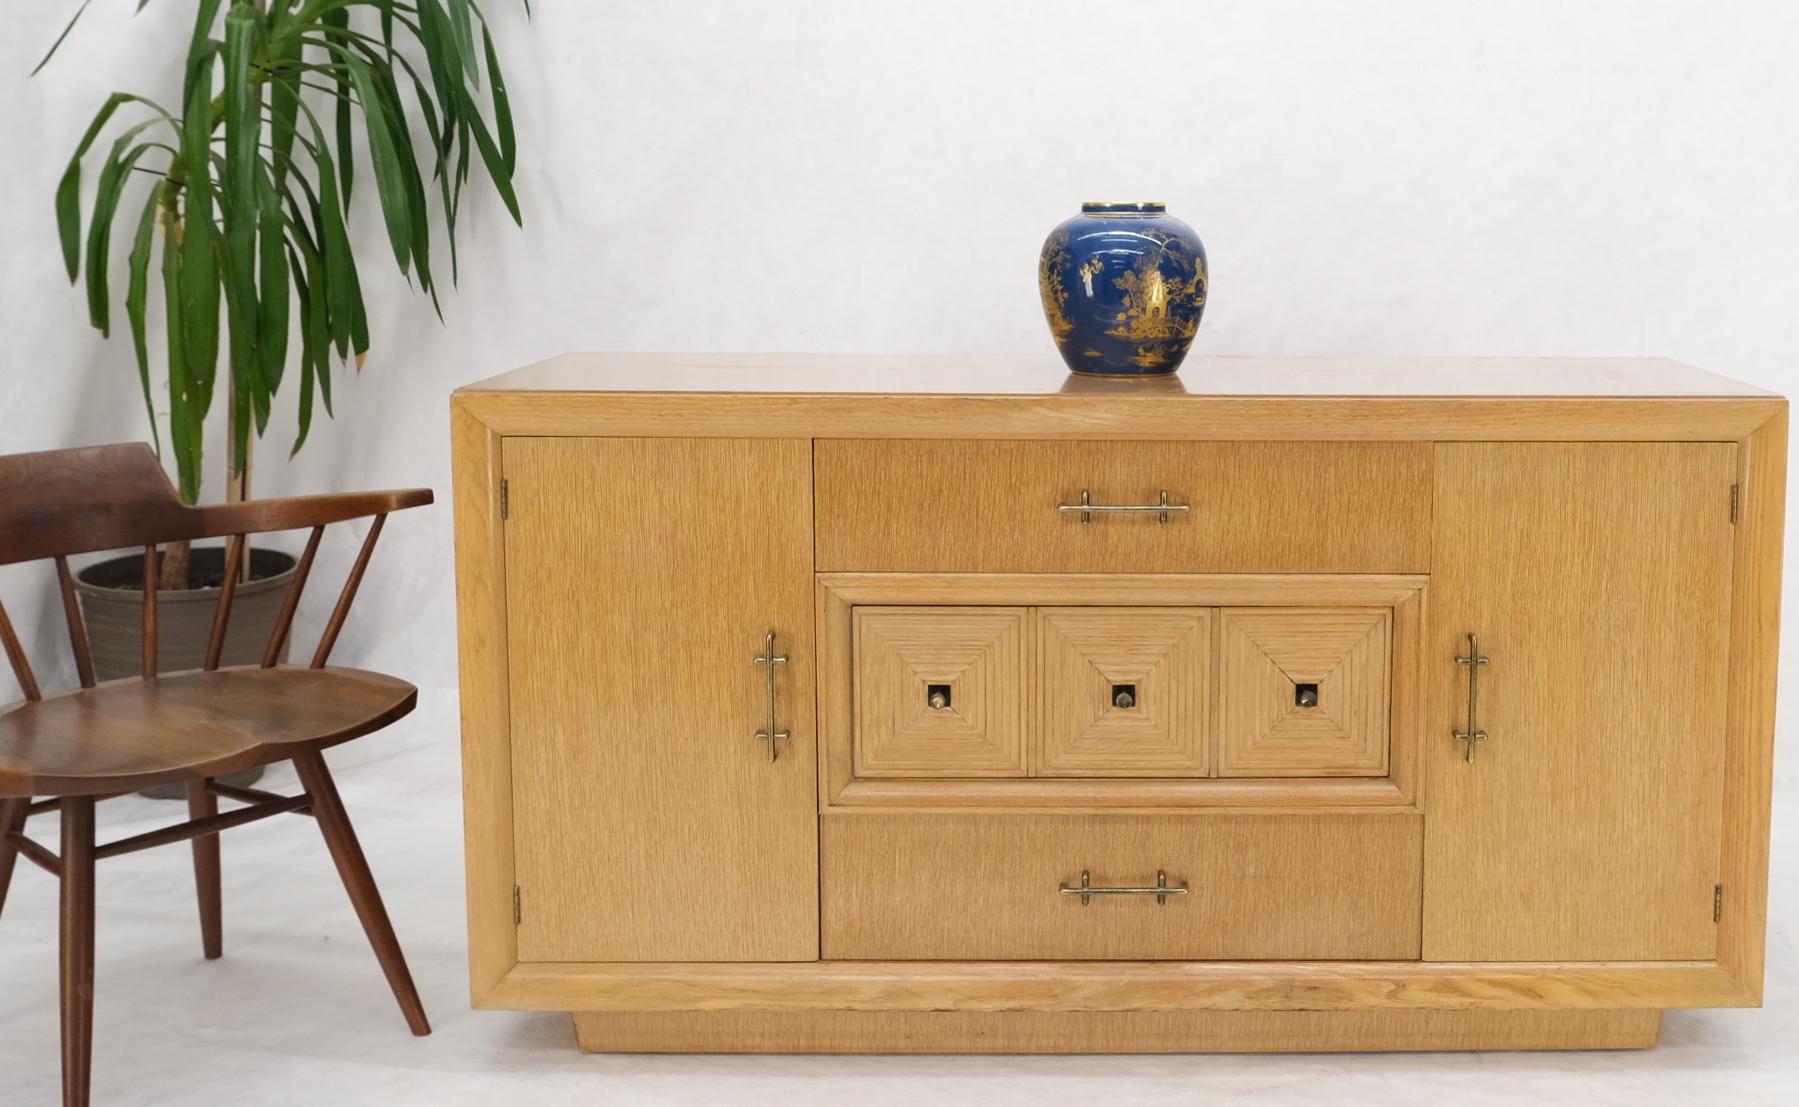 Lacquered Cerused Oak Mid Century Credenza Sideboard Dresser Cabinet Buffet For Sale